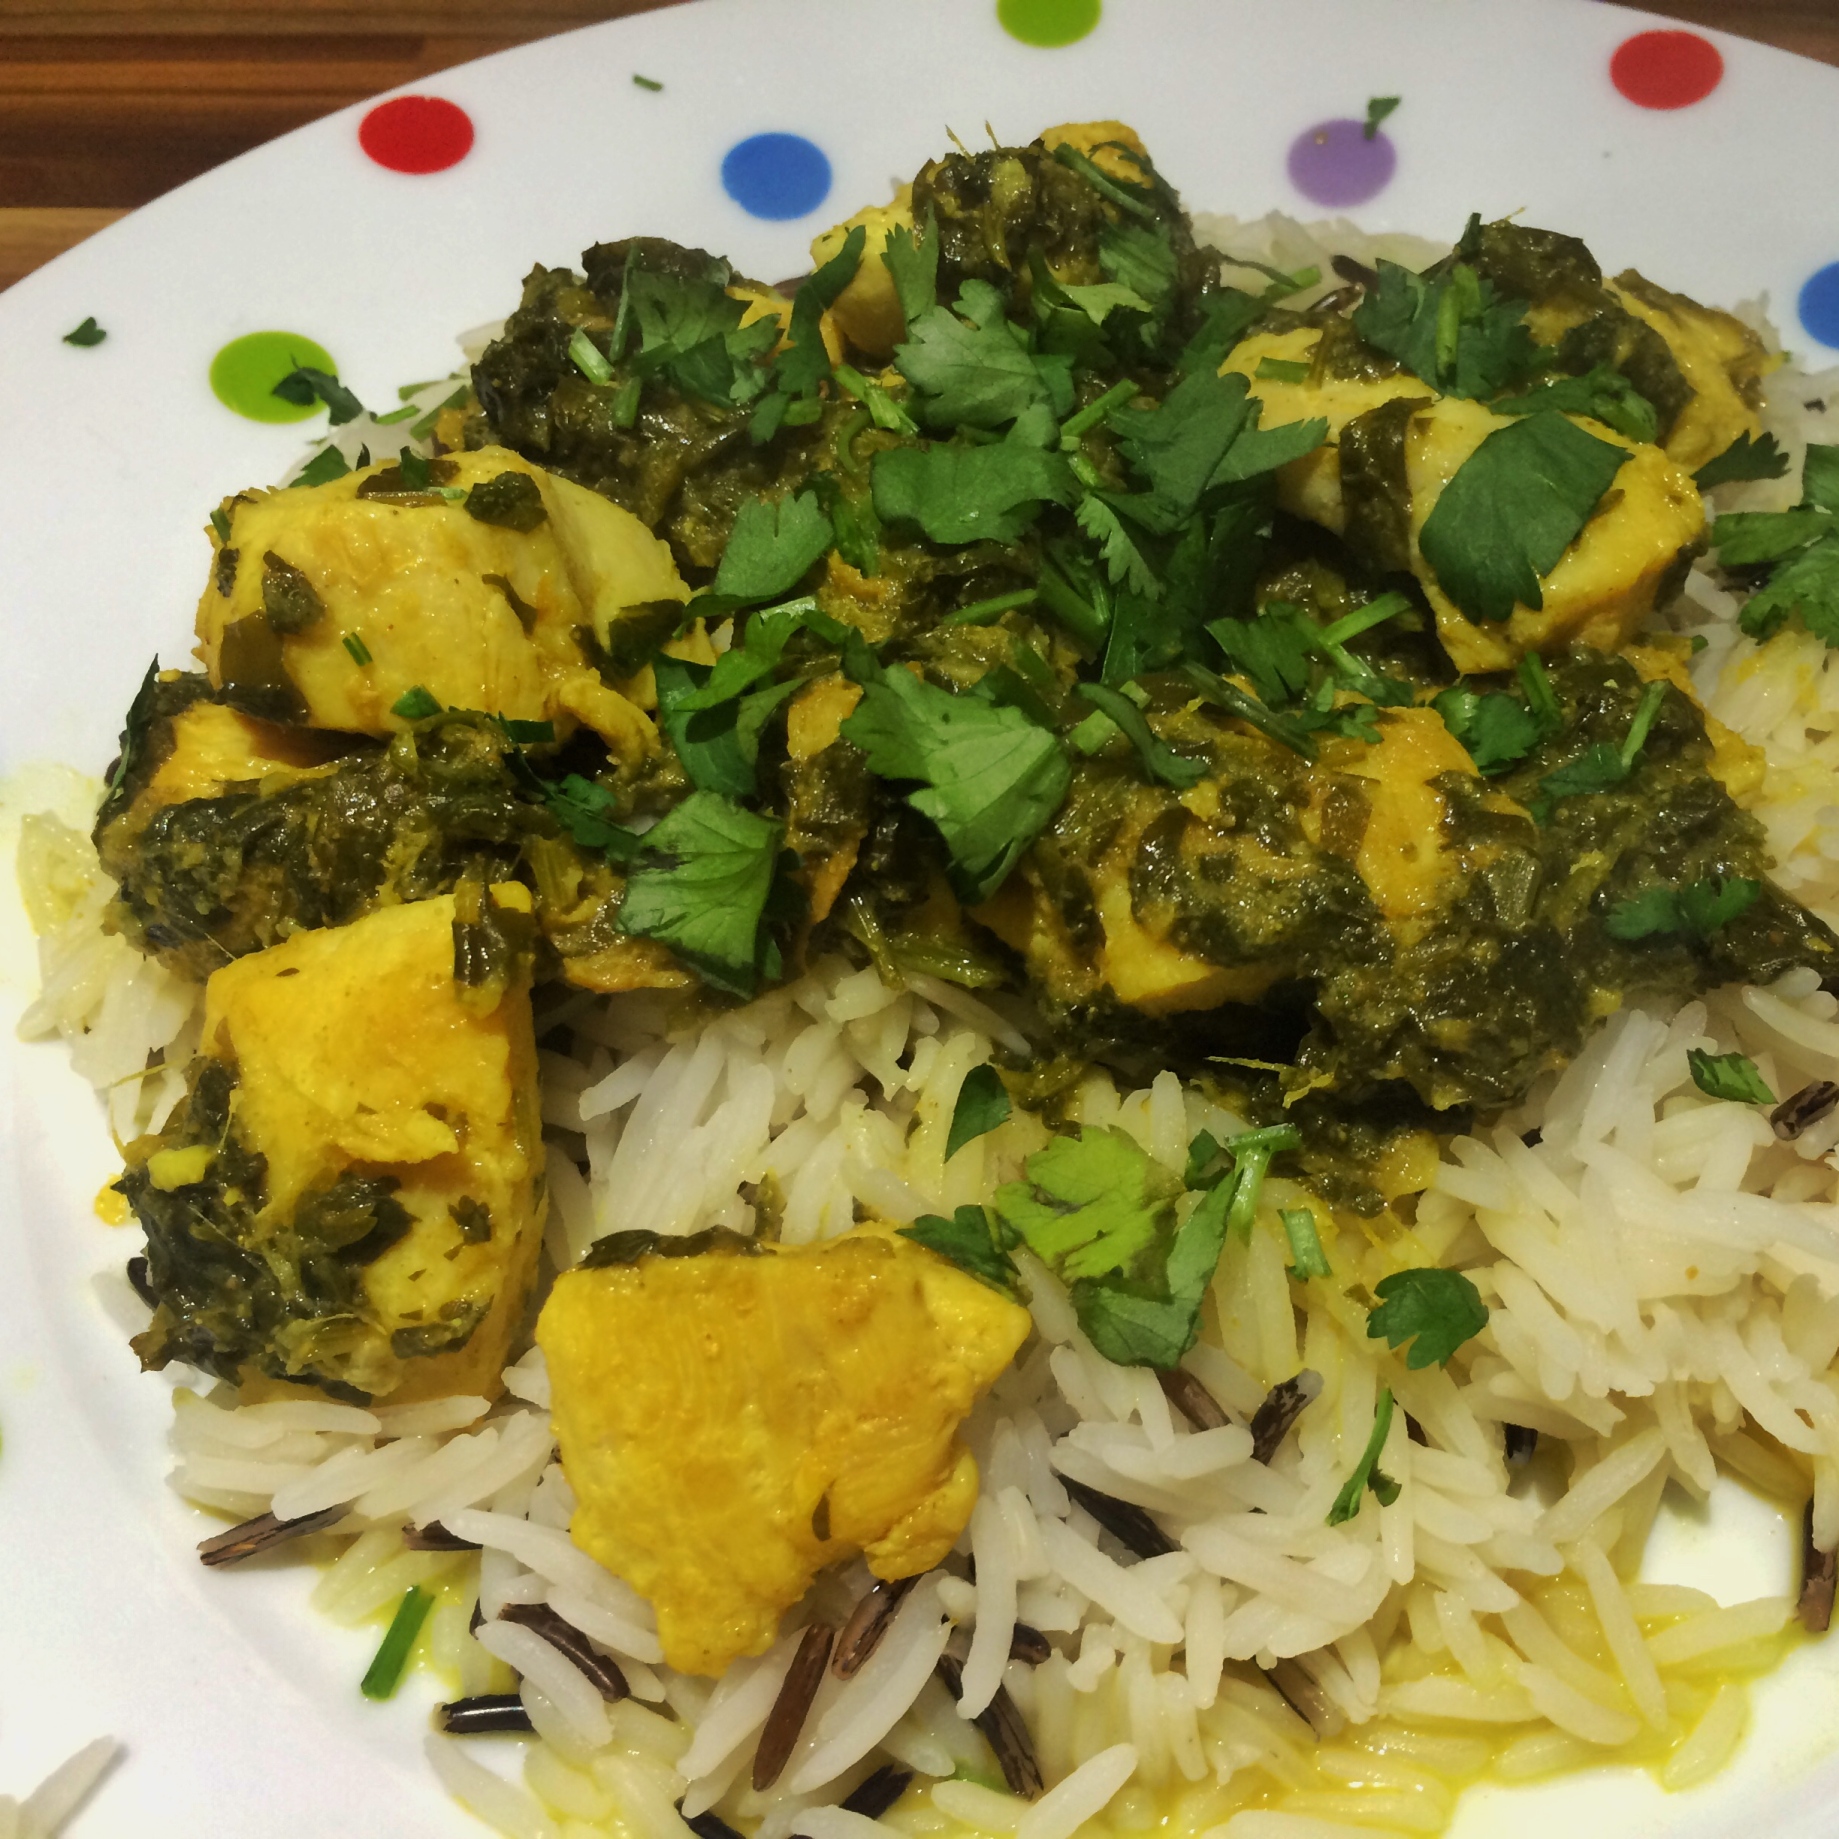 Lemon chicken with ginger and coriander